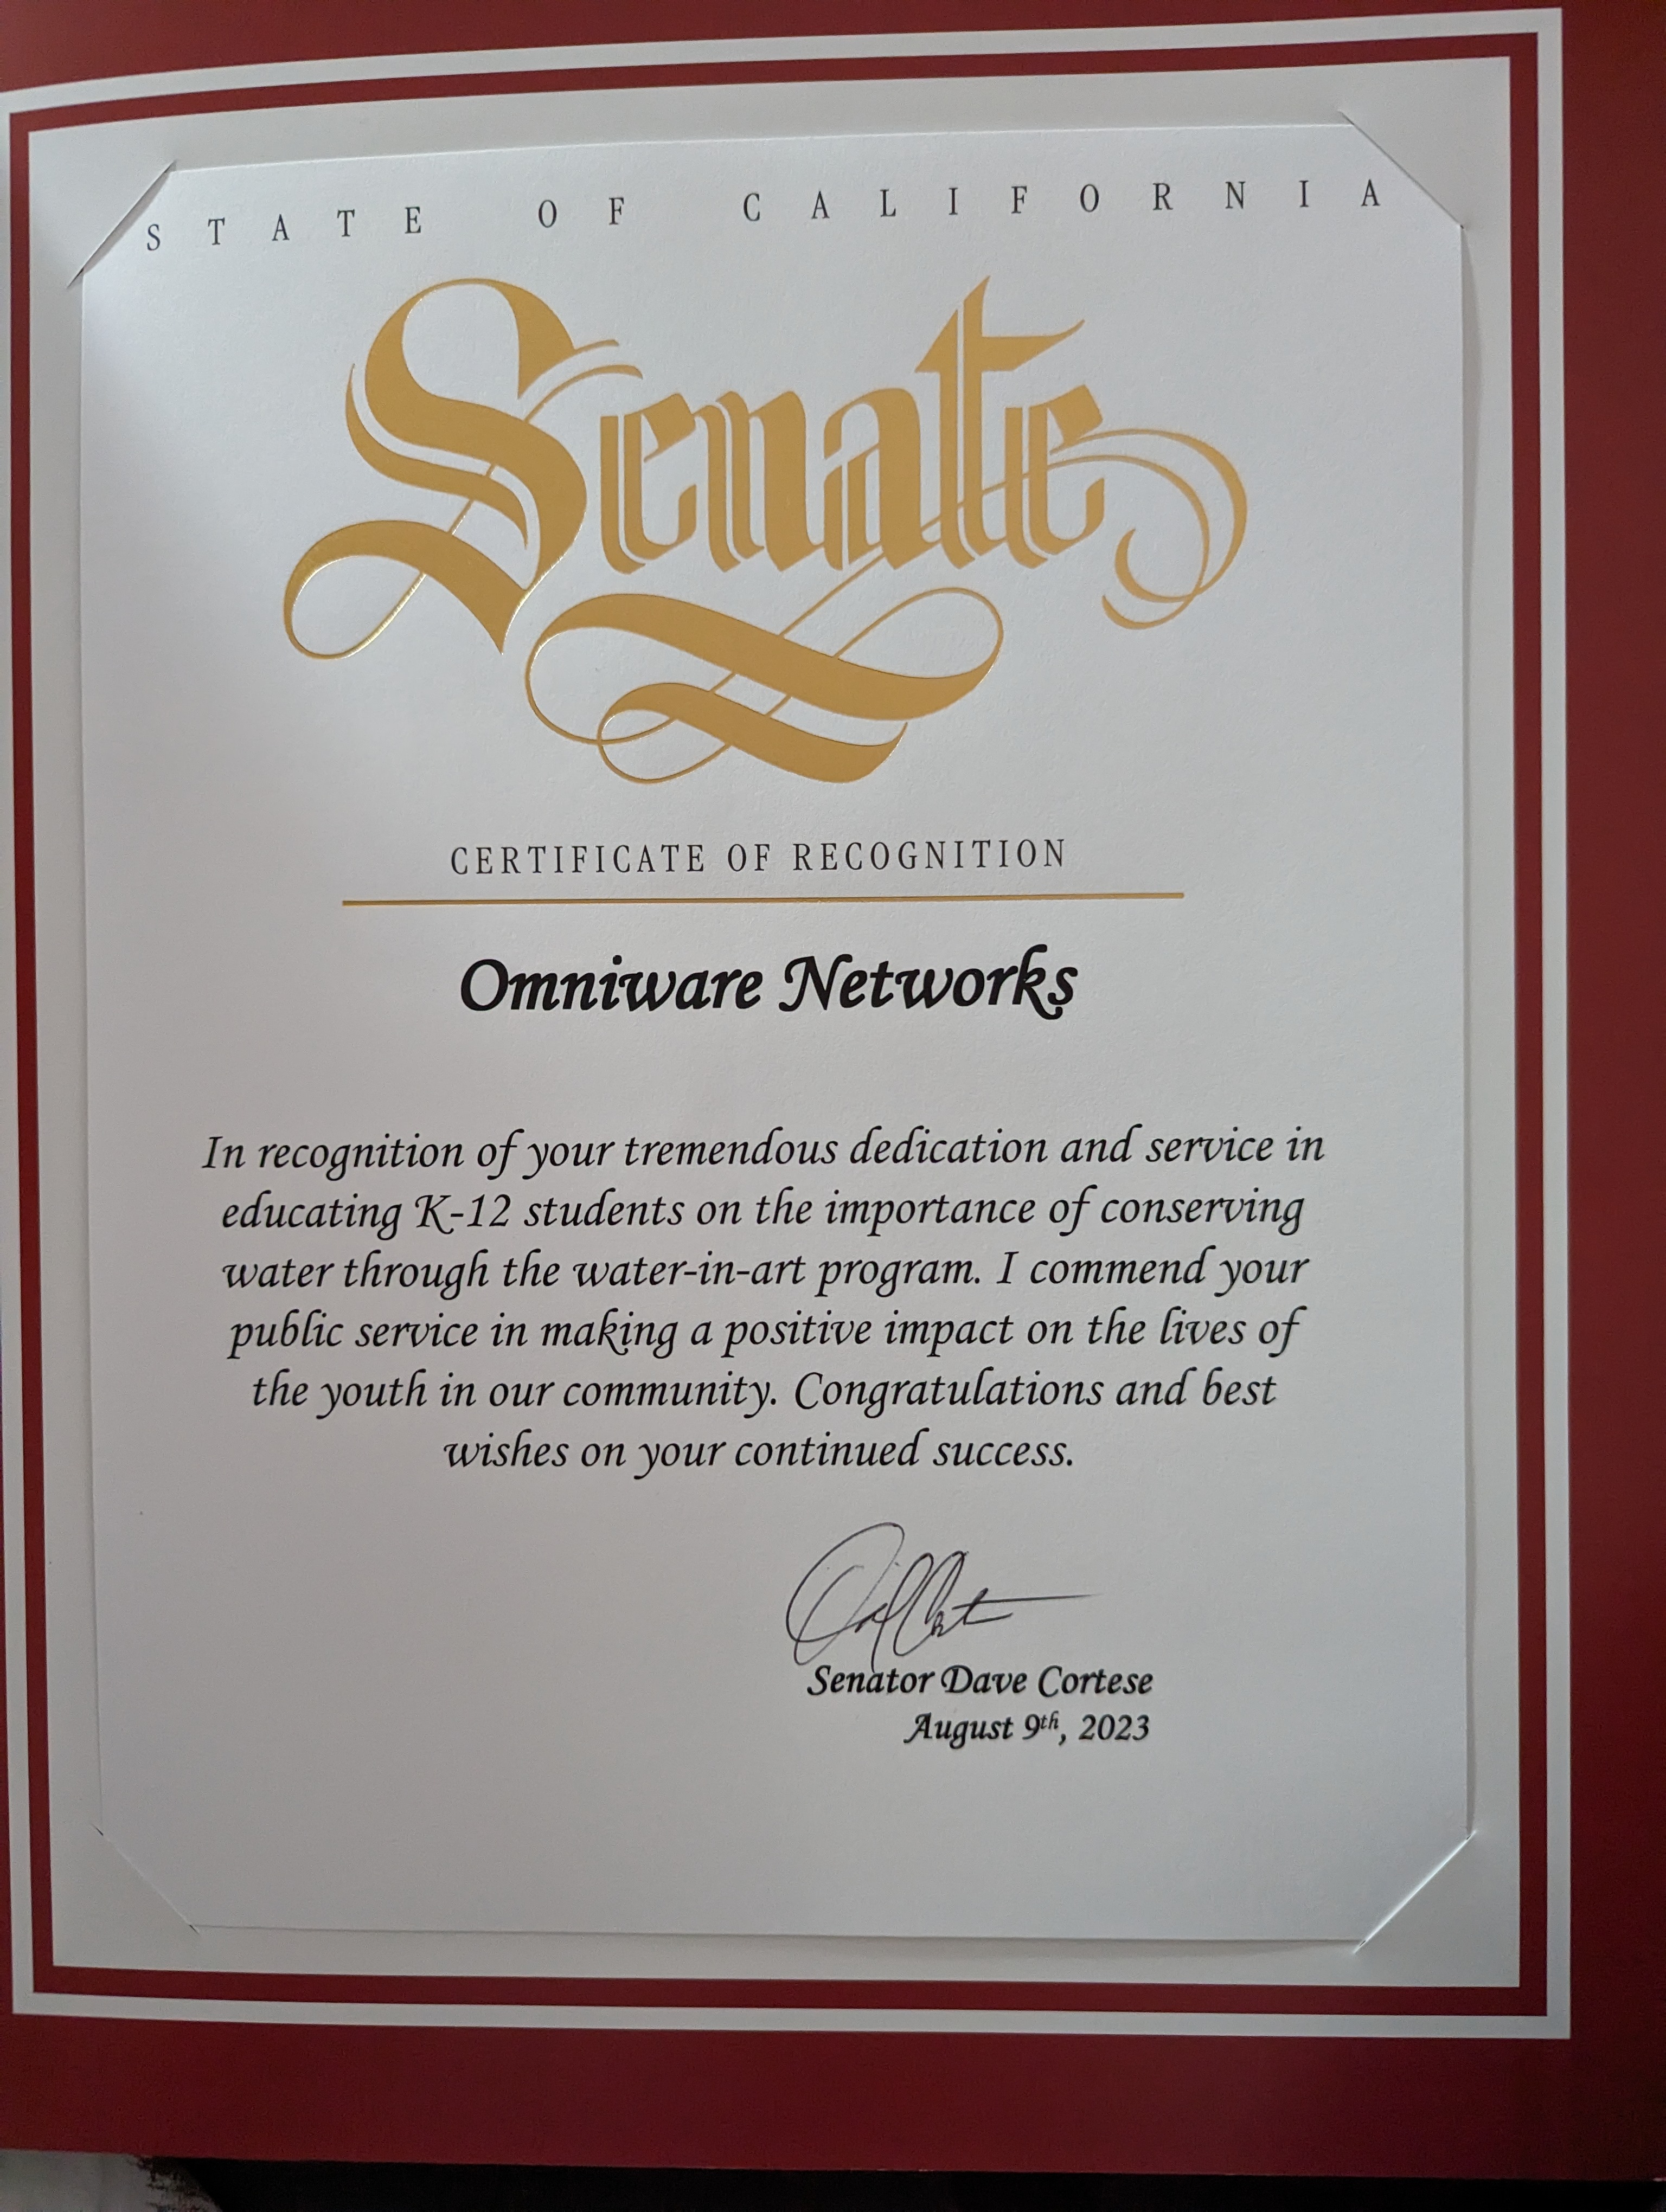 Certificate of Recognition from Sen. David Cortese